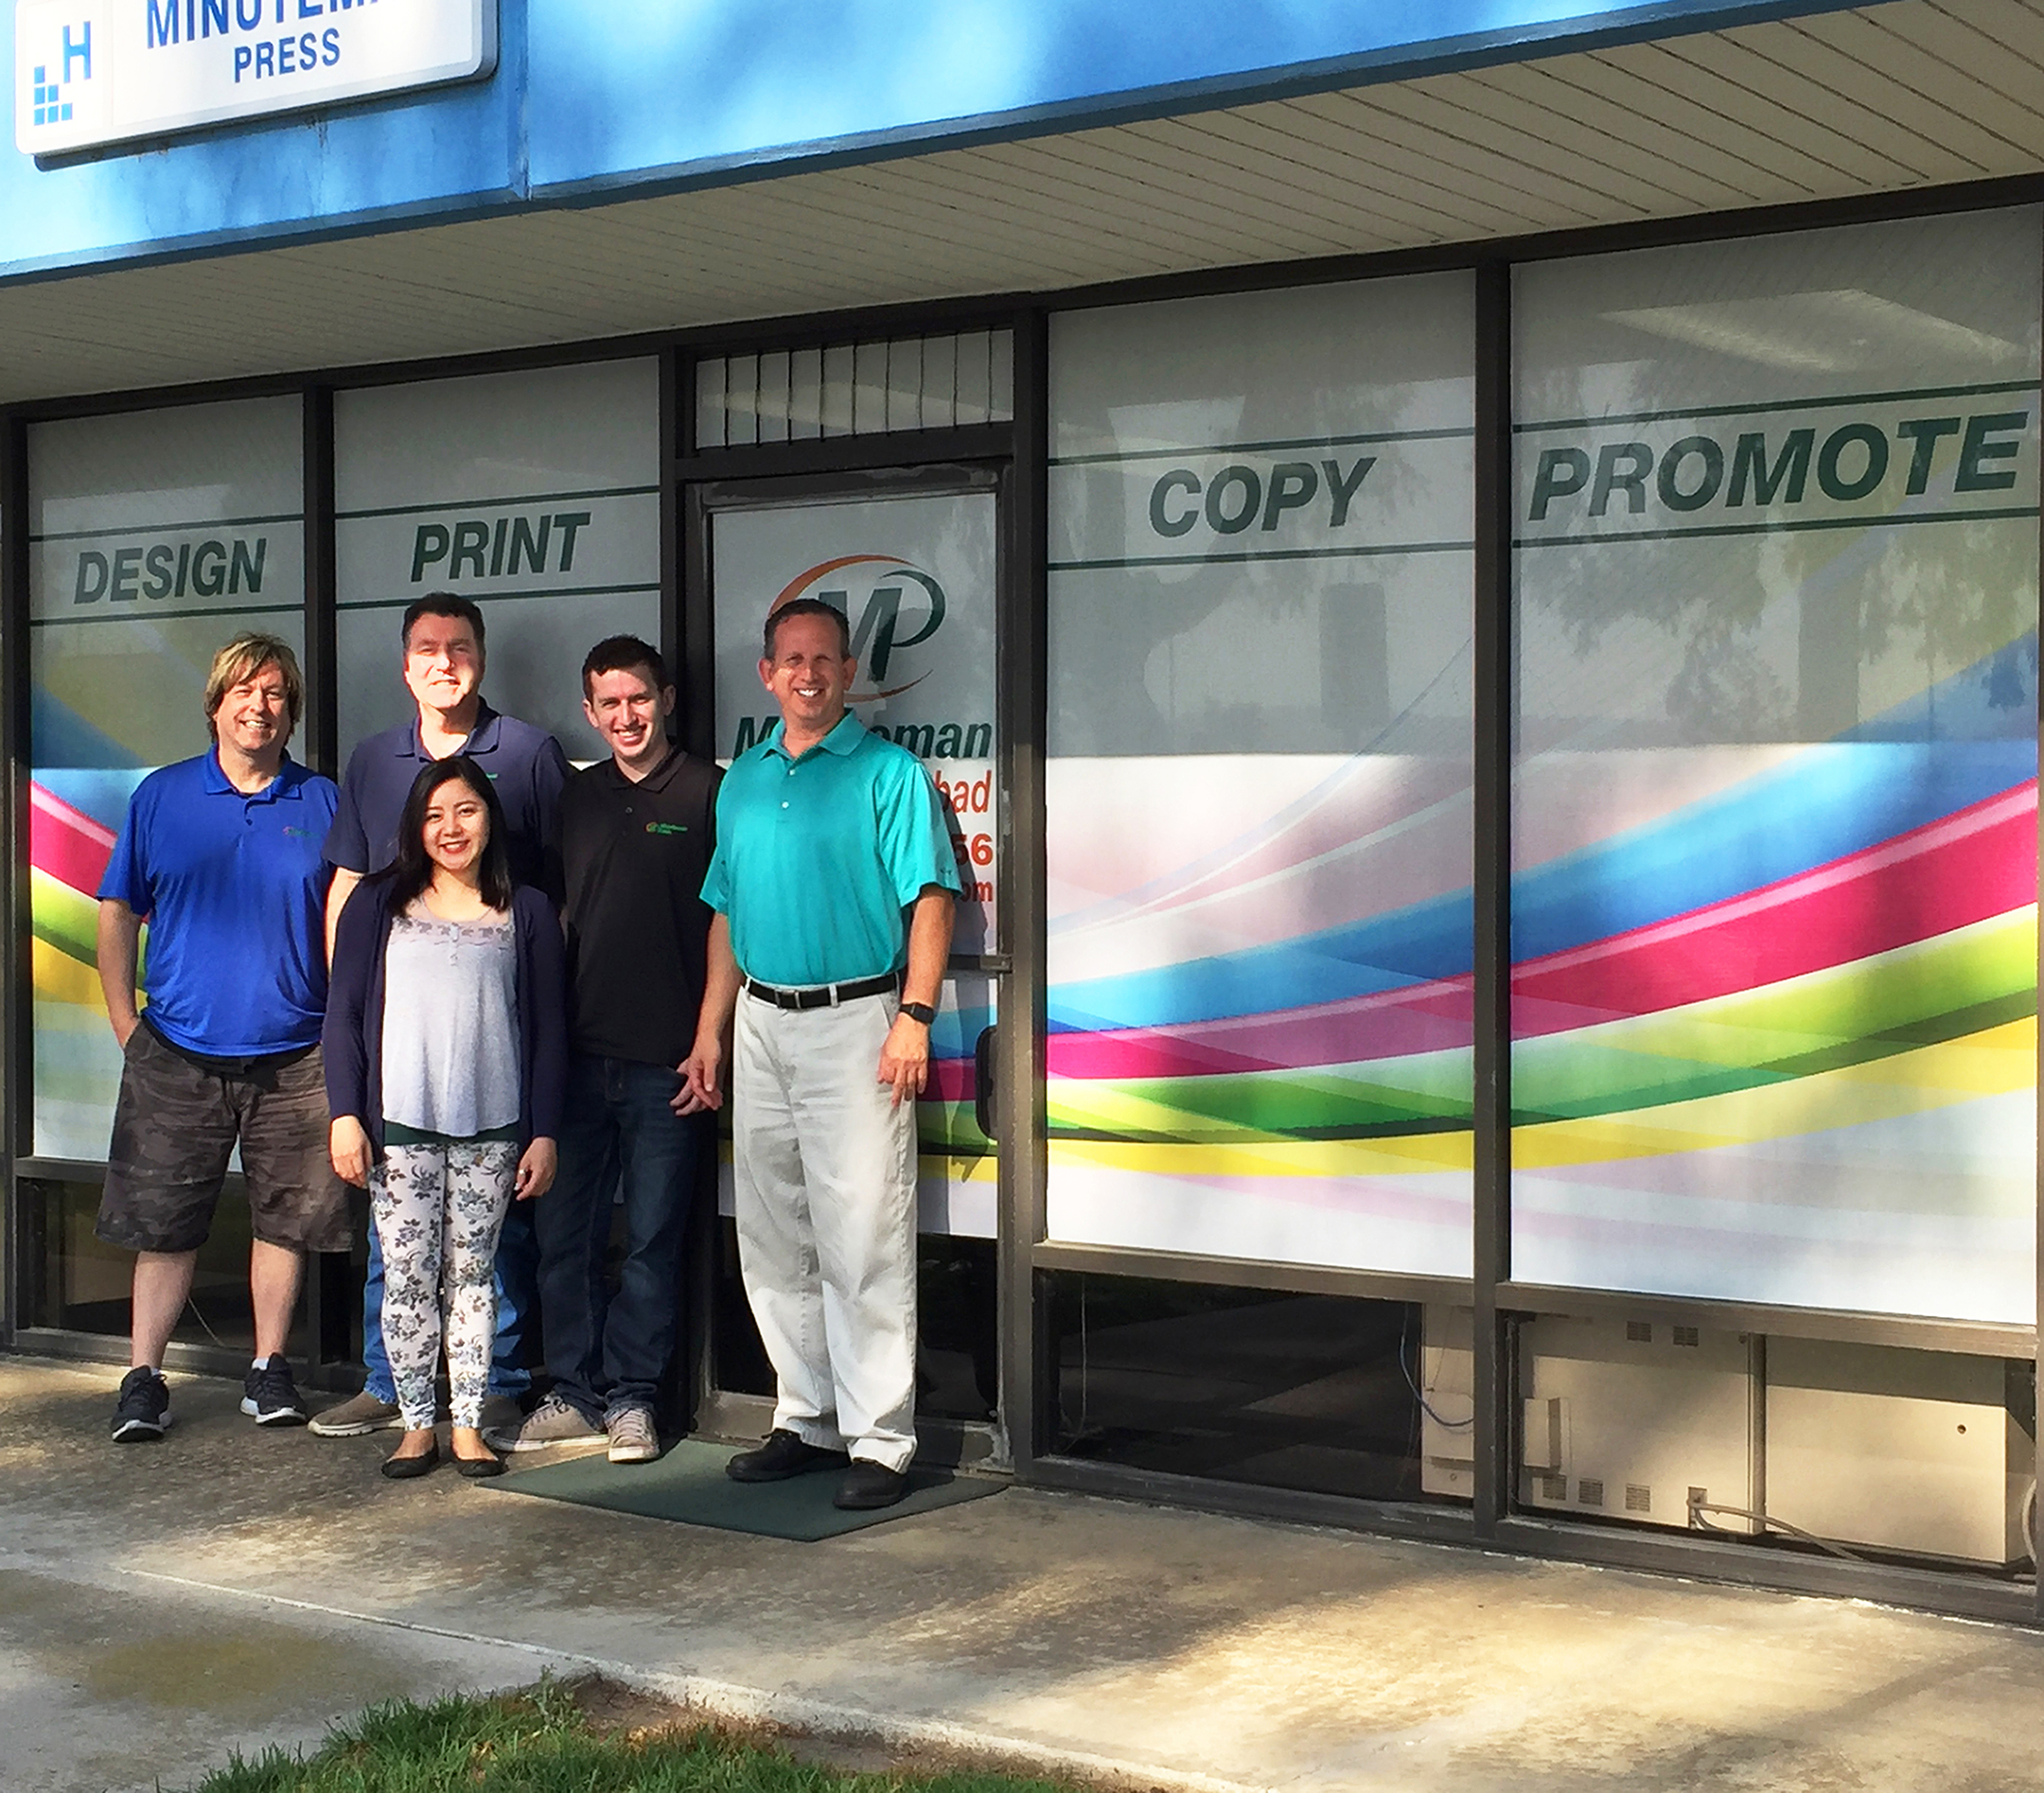 Minuteman Press printing franchise staff in Carlsbad, CA - pictured from left to right: Graphic Design Manager Ron Jones, Production Manager Bill Hawk, Customer Service Manager Karina Revita, Production Specialist Shane Sirota, and Franchise Owner Jeff Sirota.